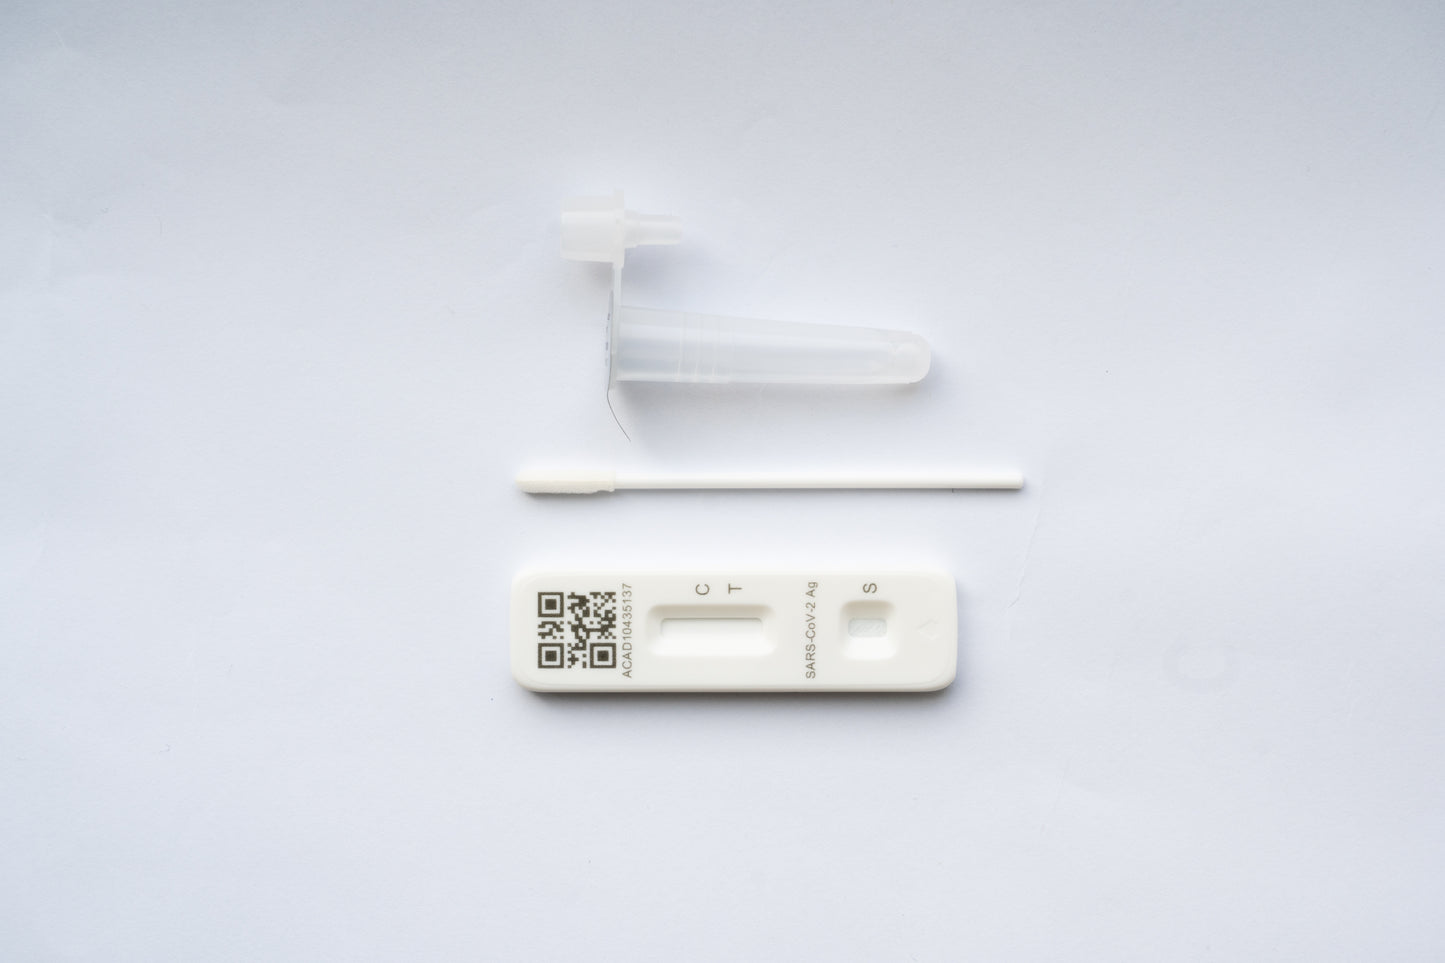 Home Use COVID-19 Lateral Flow Test Kits